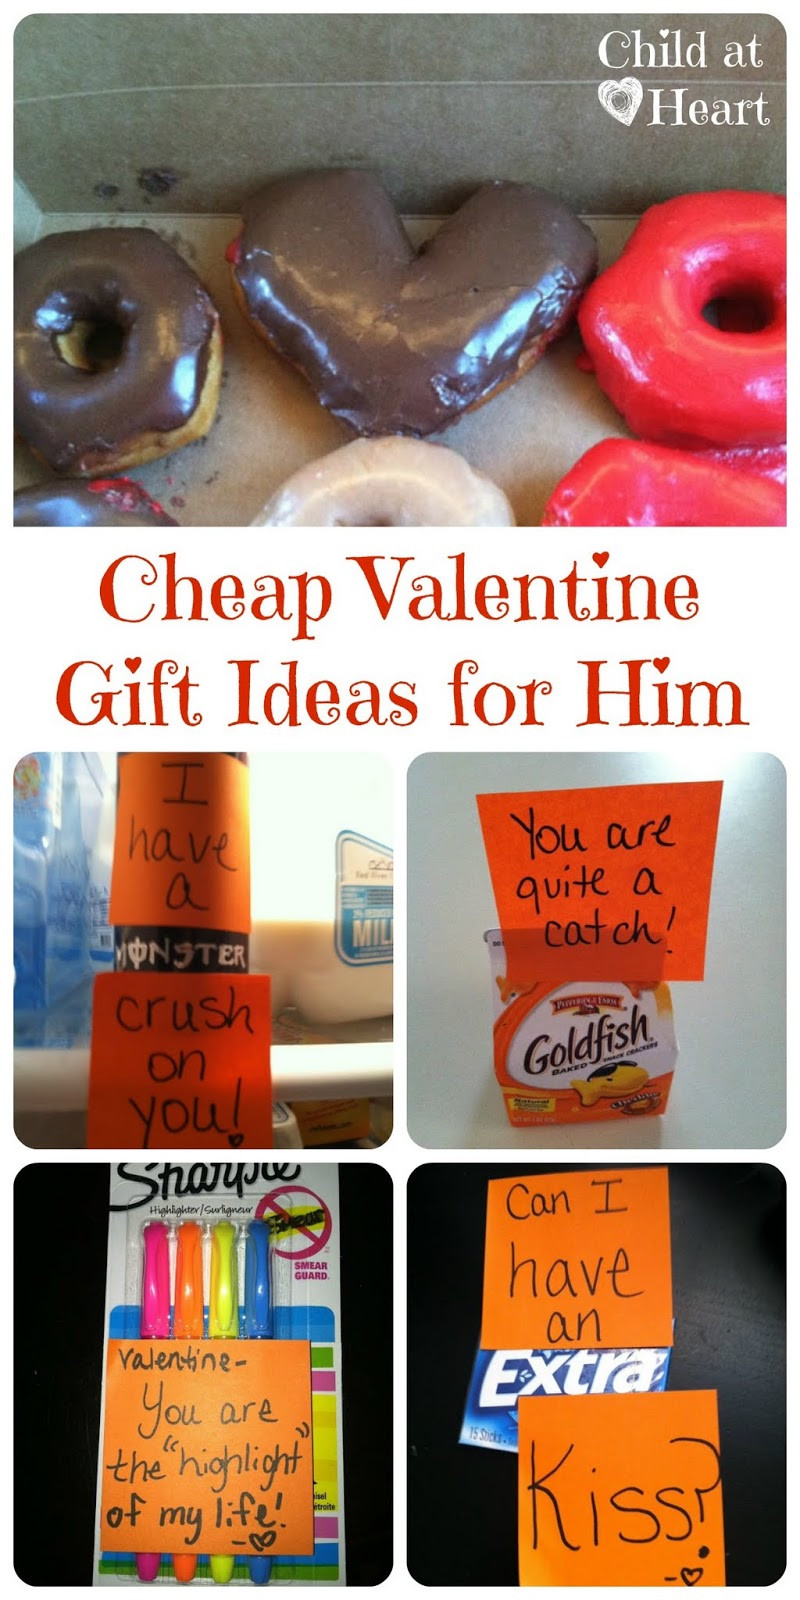 Cheap Valentines Day Gifts For Him
 Cheap Valentine Gift Ideas for Him Child at Heart Blog